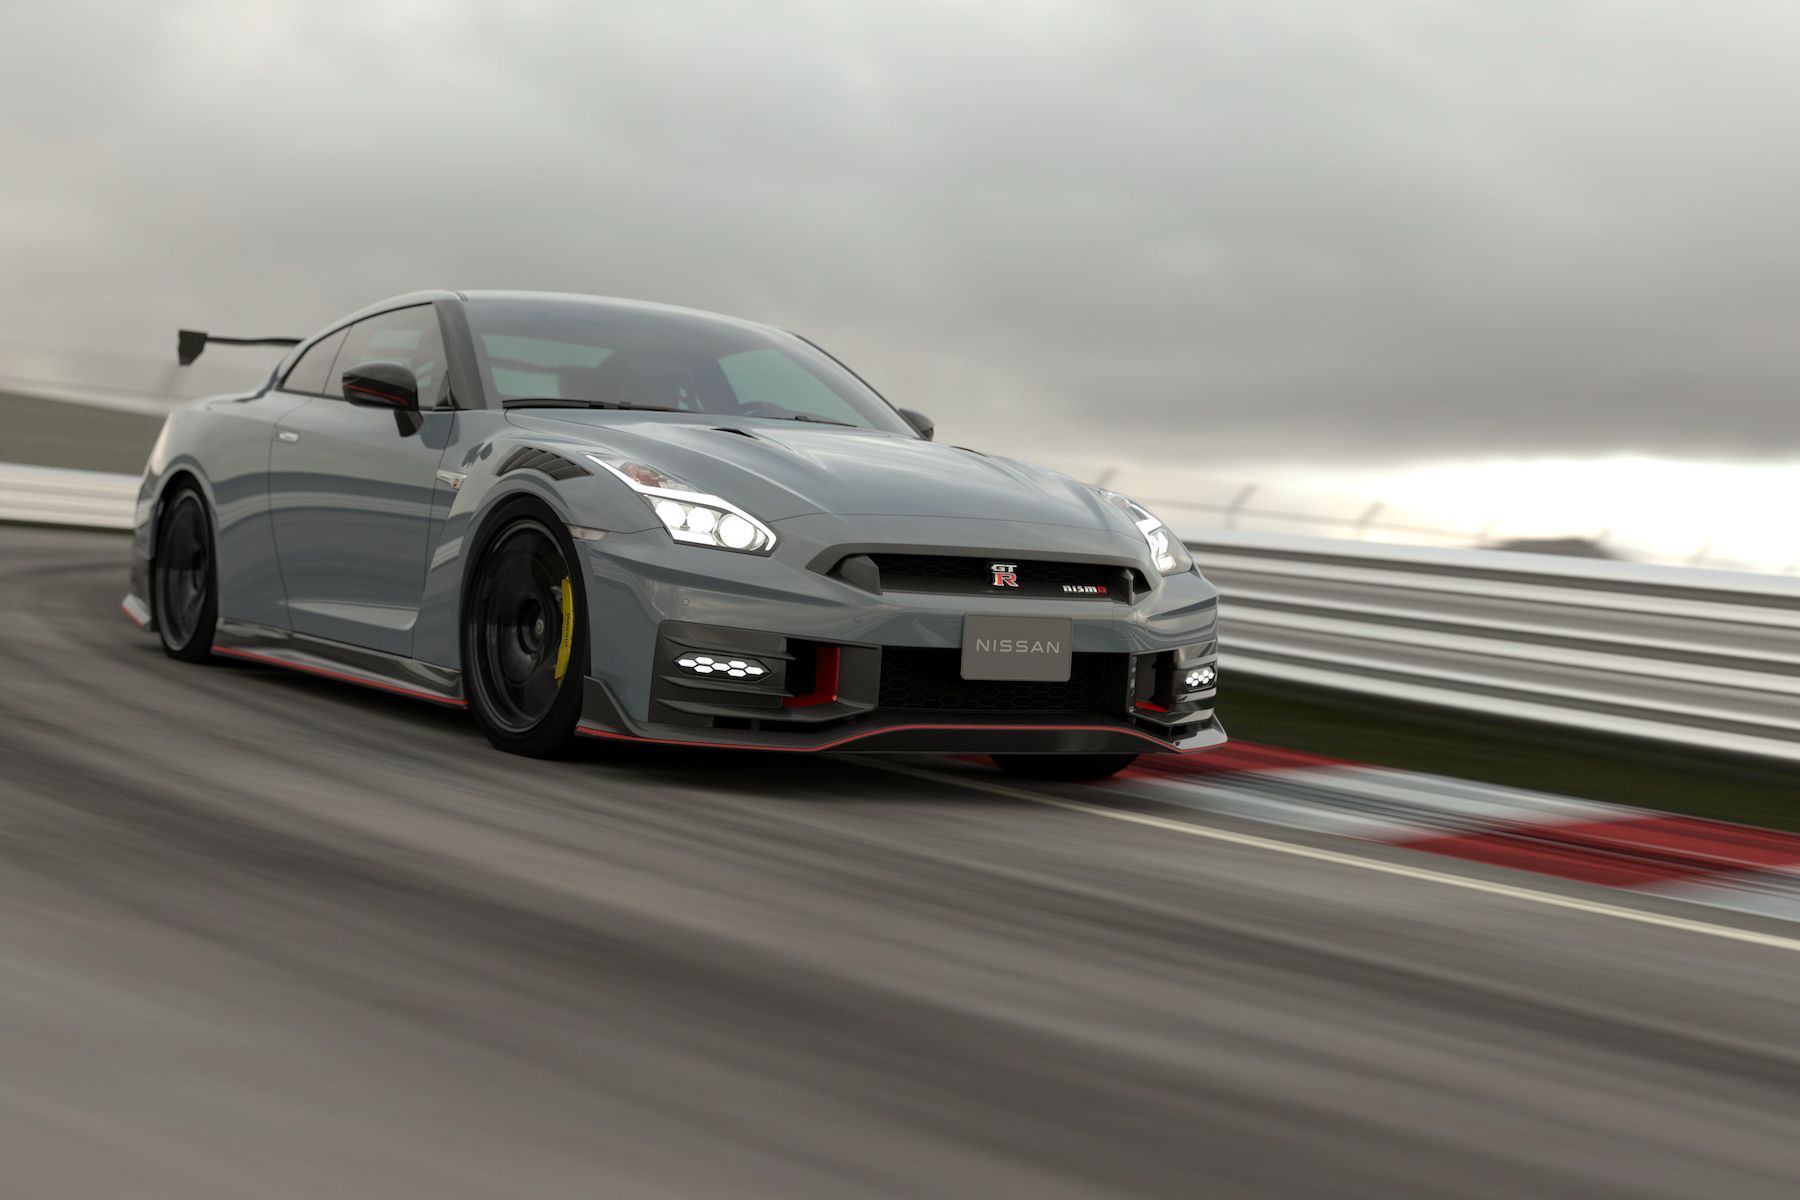 Nissan Skyline Nismo editions unveiled as Japan-only specials - Drive